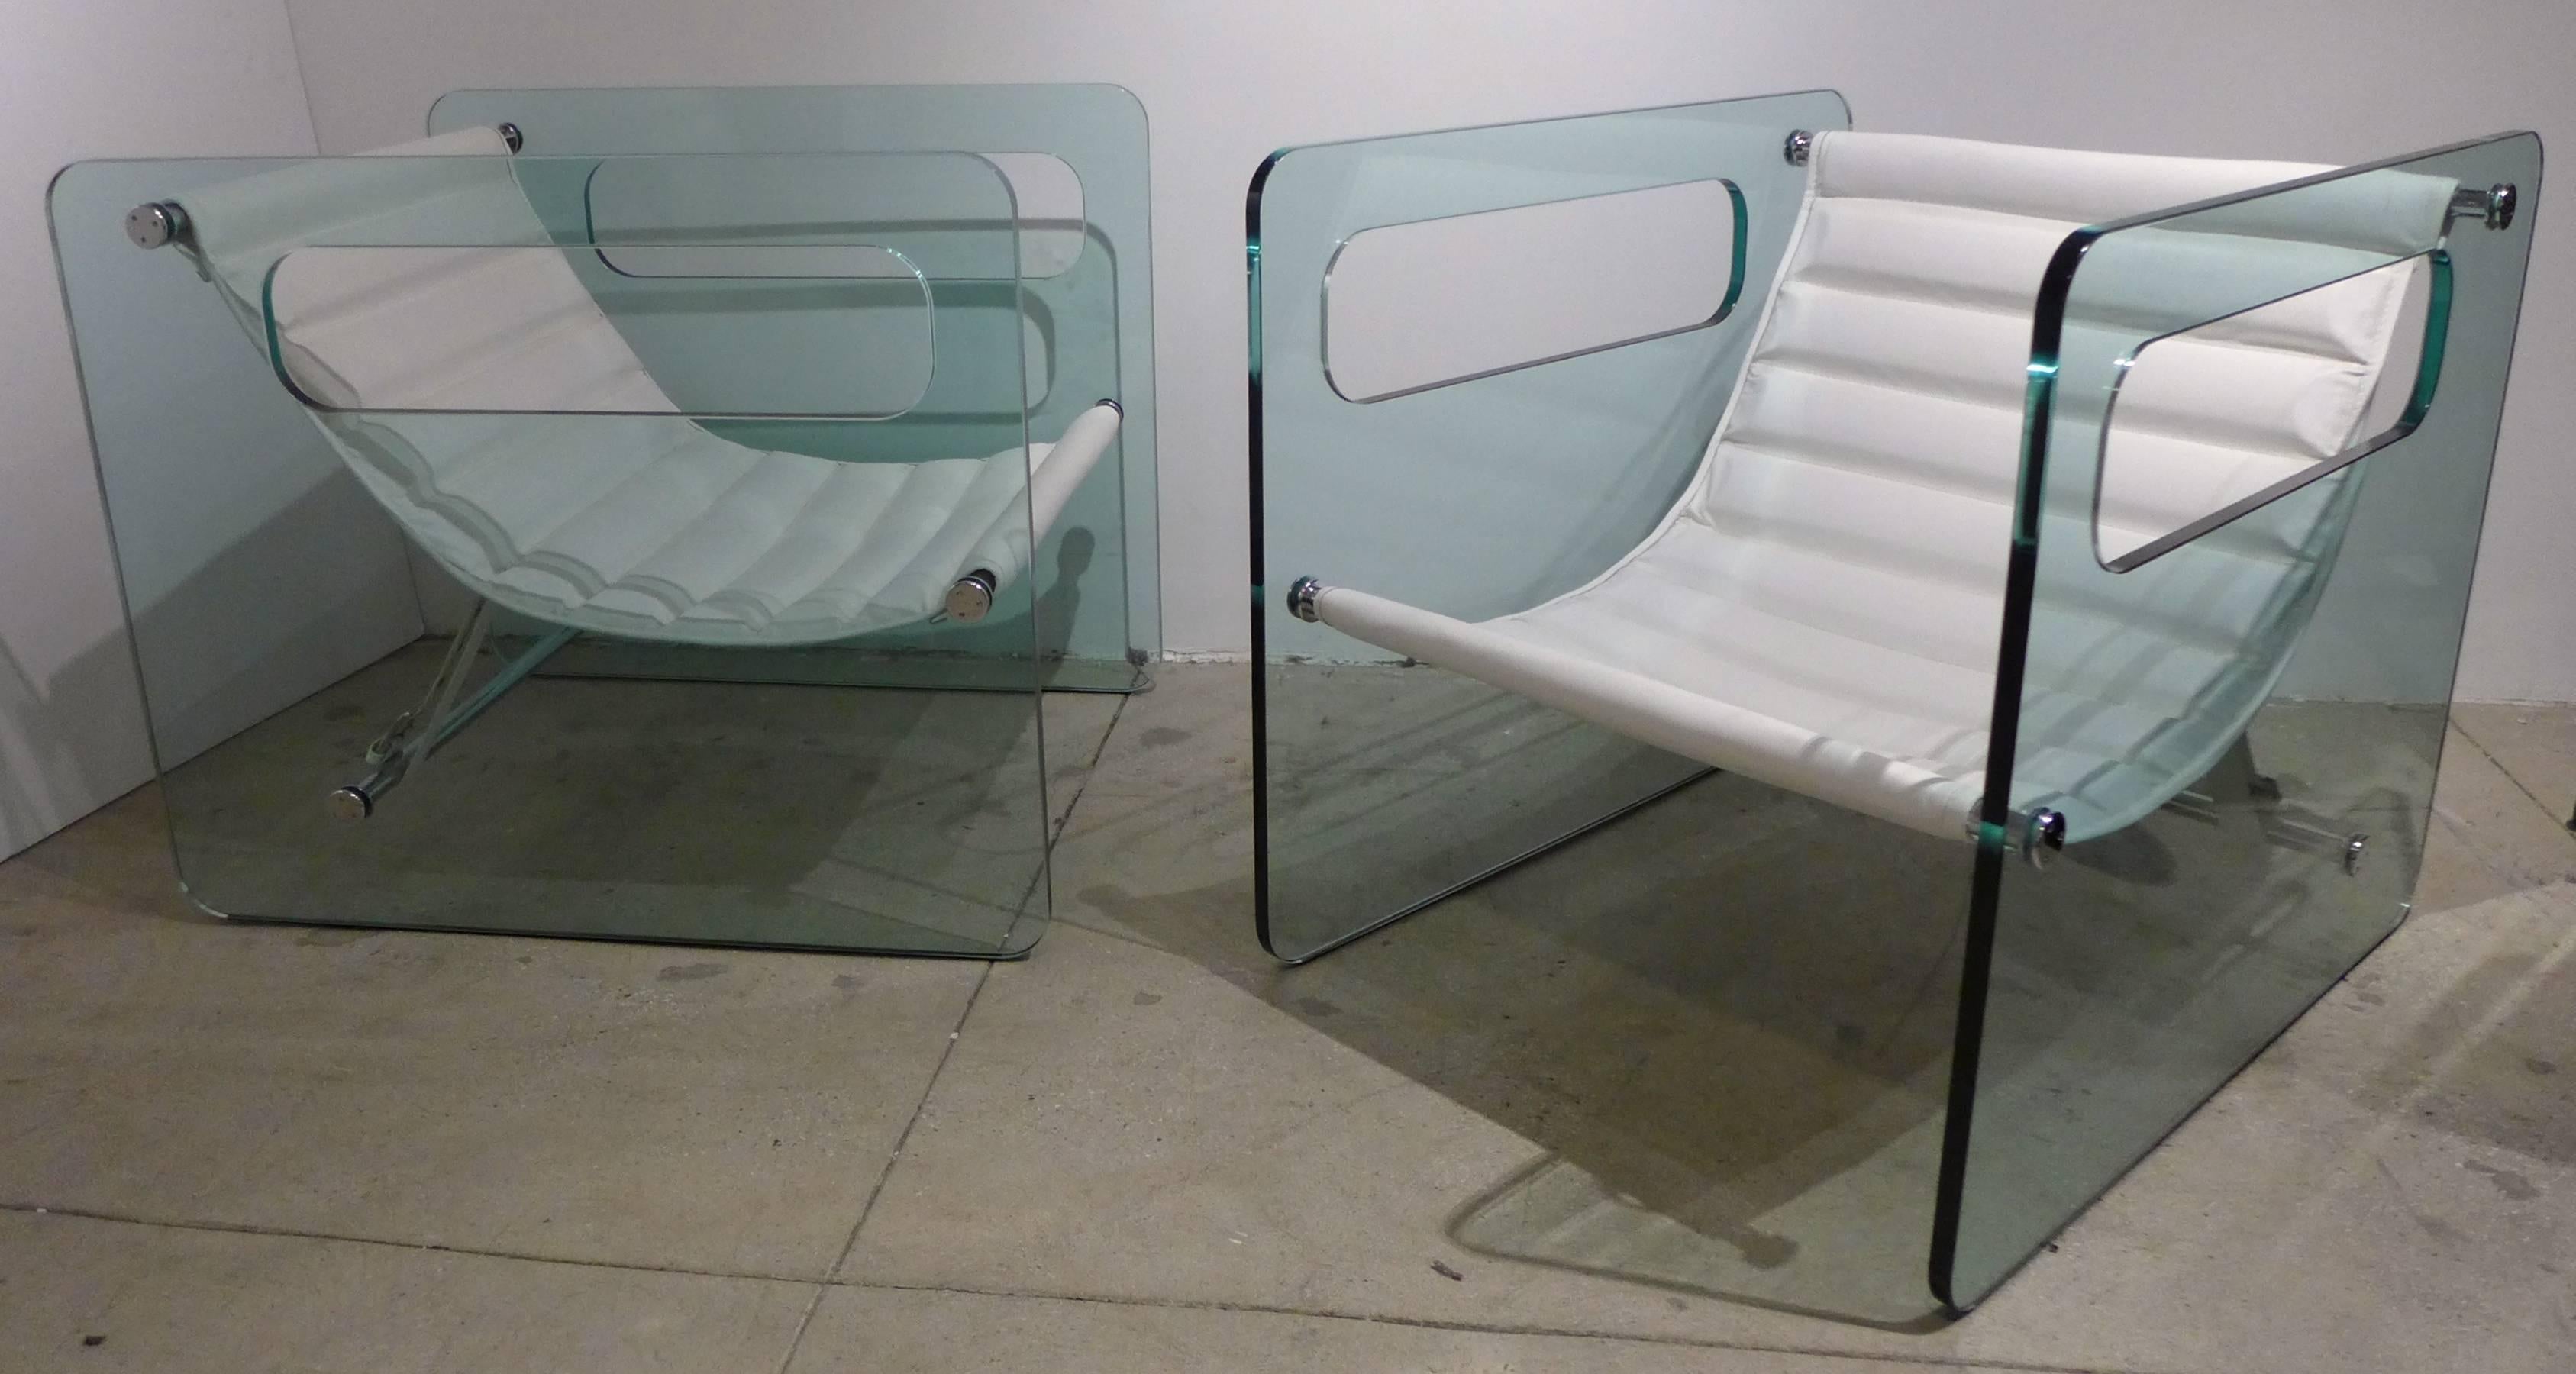 Pair of lounge chairs with three-quarter inch plate glass sides, chrome-plated steel supports and channeled leather slings. A 2002 design by Italian architect, graphic designer and furniture designer Giovanni Tommaso Garattoni. A chic and sleek